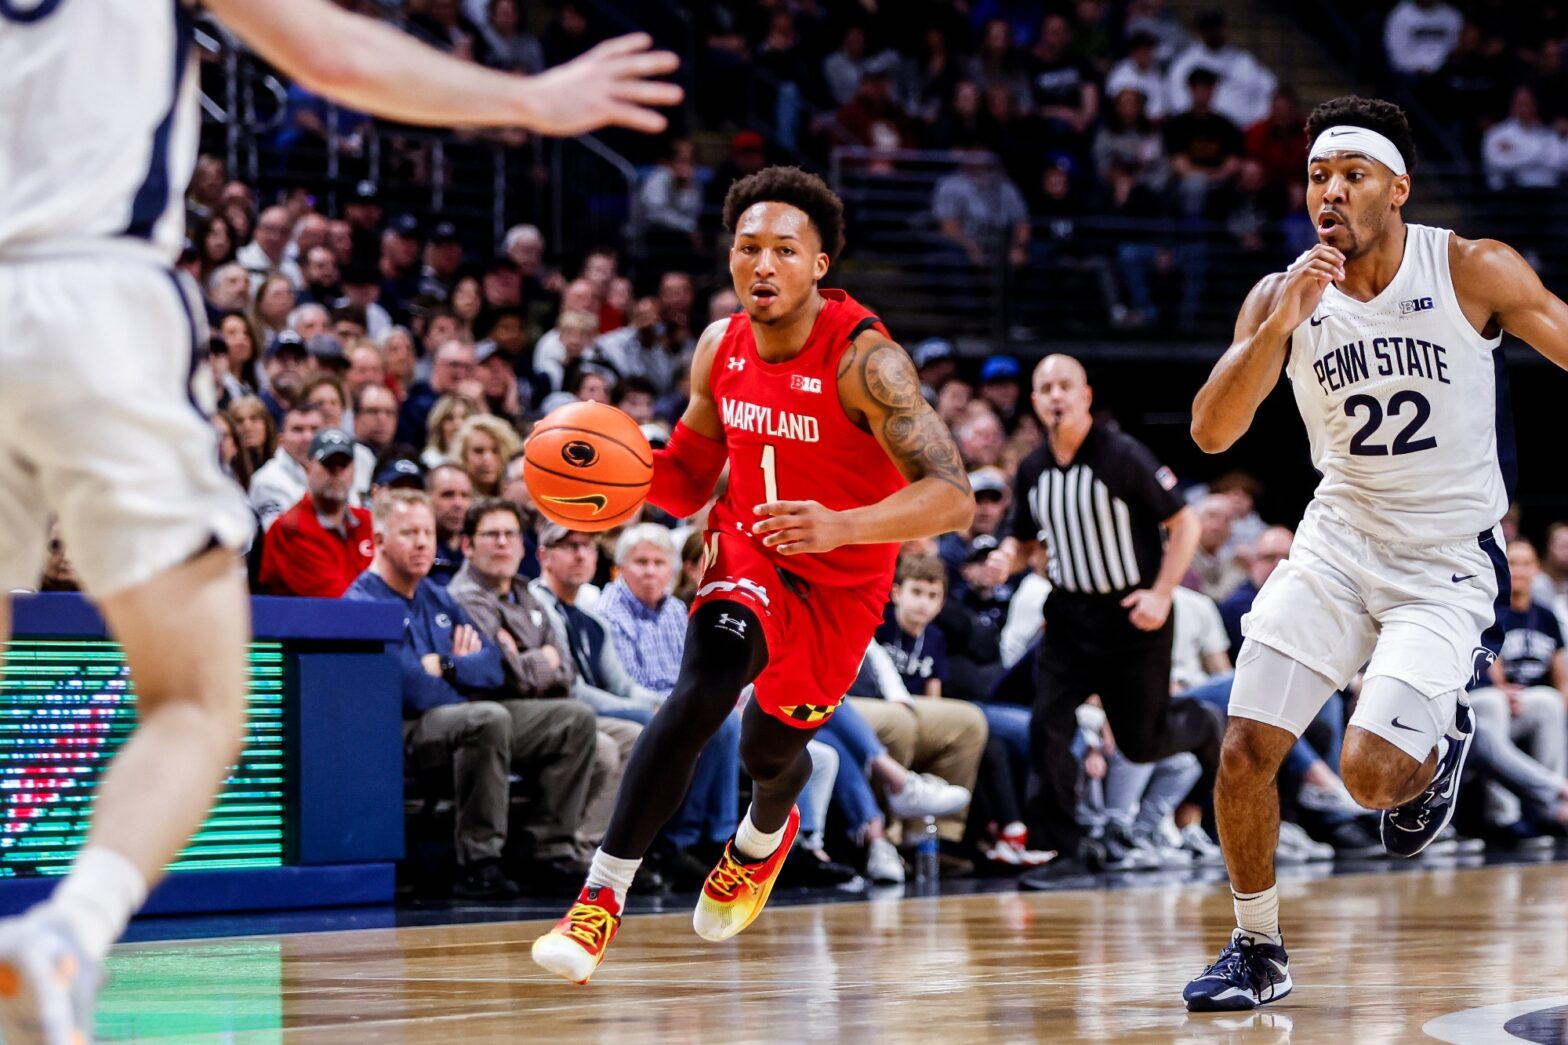 Maryland basketball guard Jahmir Young dribbles the ball down the court vs. Penn State